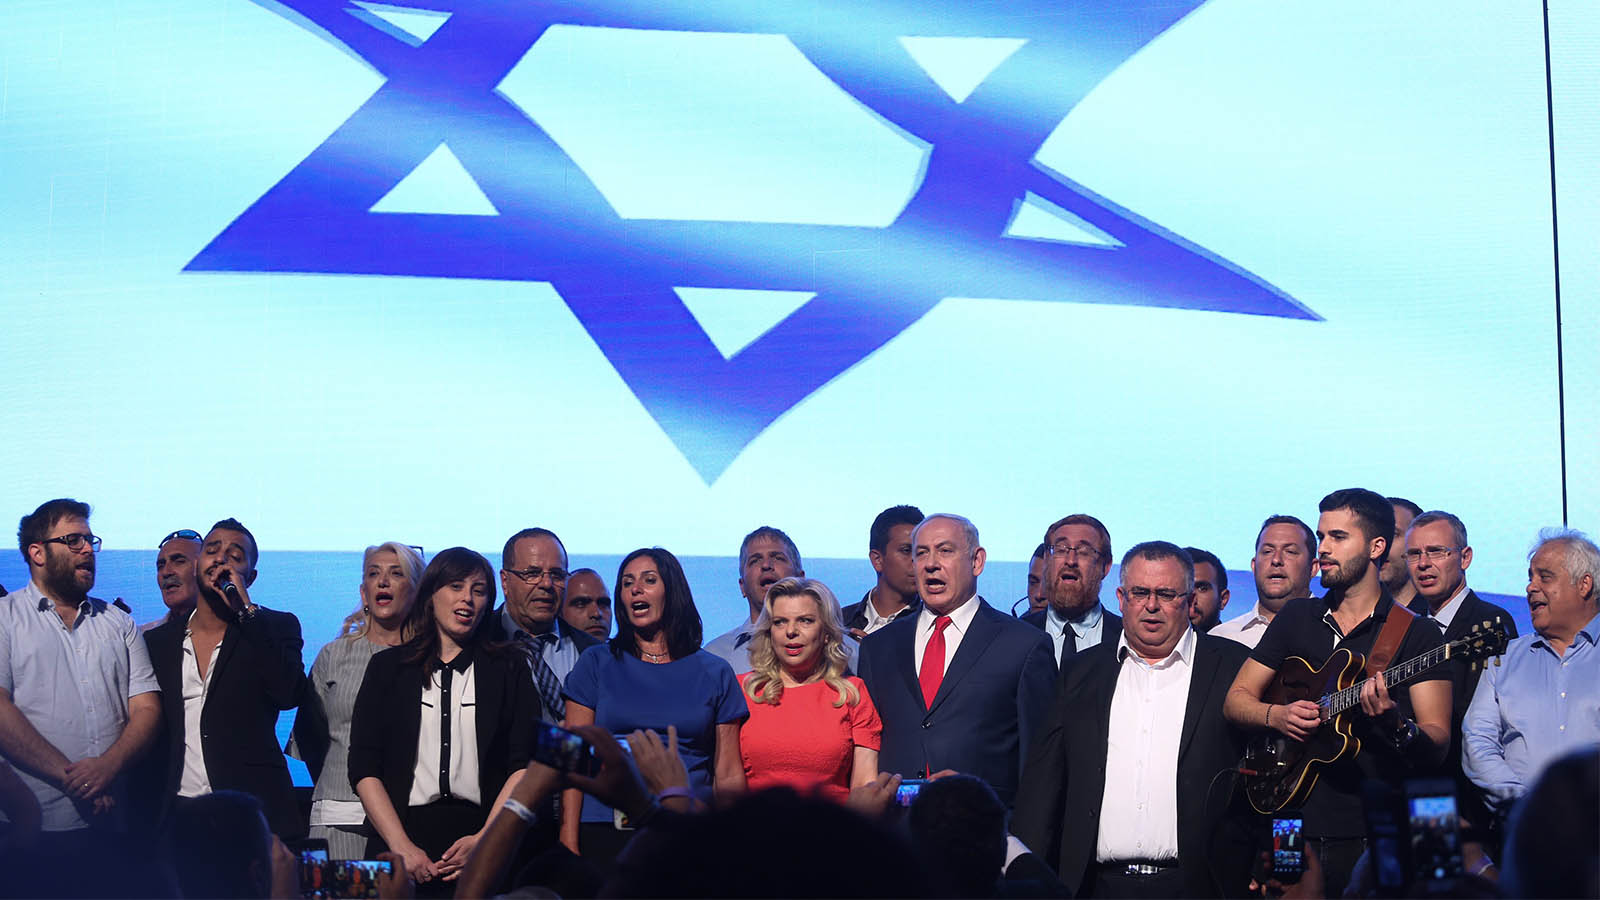 Prime Minister Benjamin Netanyah, his wife Sara, and Likud party members, at a toast ahead the Jewish holiday of Rosh Hashana, and support rally at Airport City, on August 30, 2017. Photo by Miriam Alster/Flash90